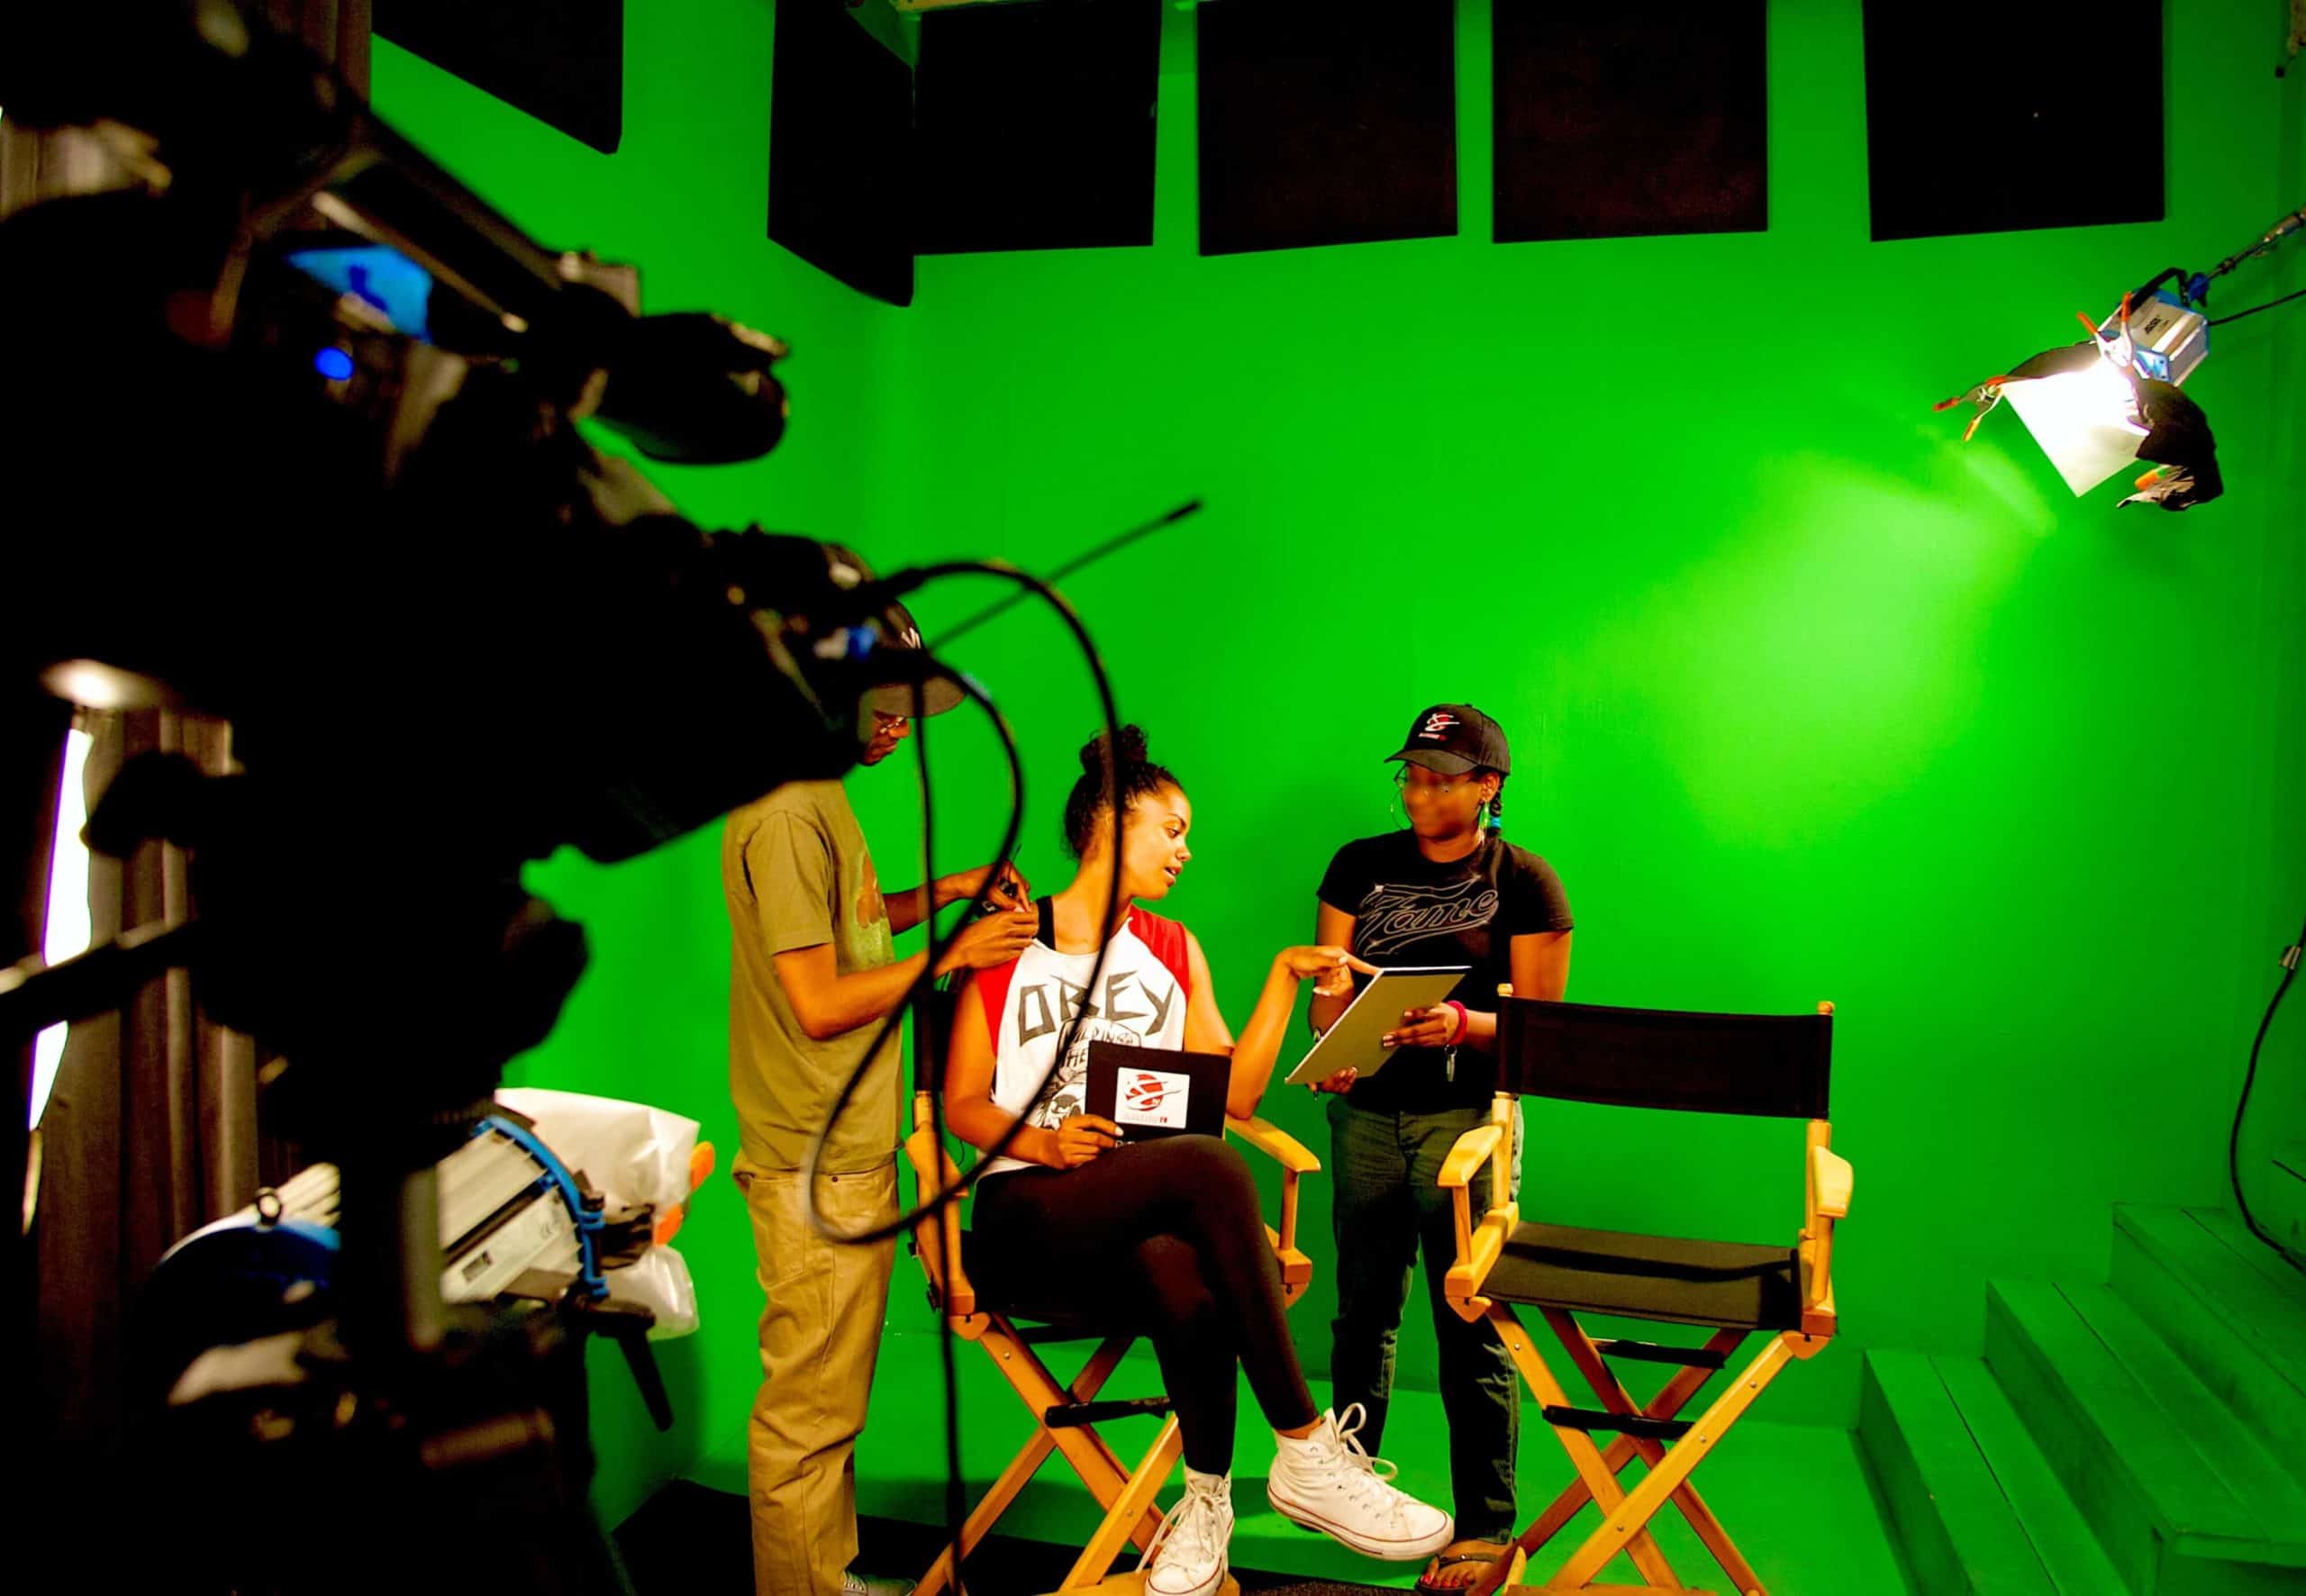 How much does it vost to rent a green screen room